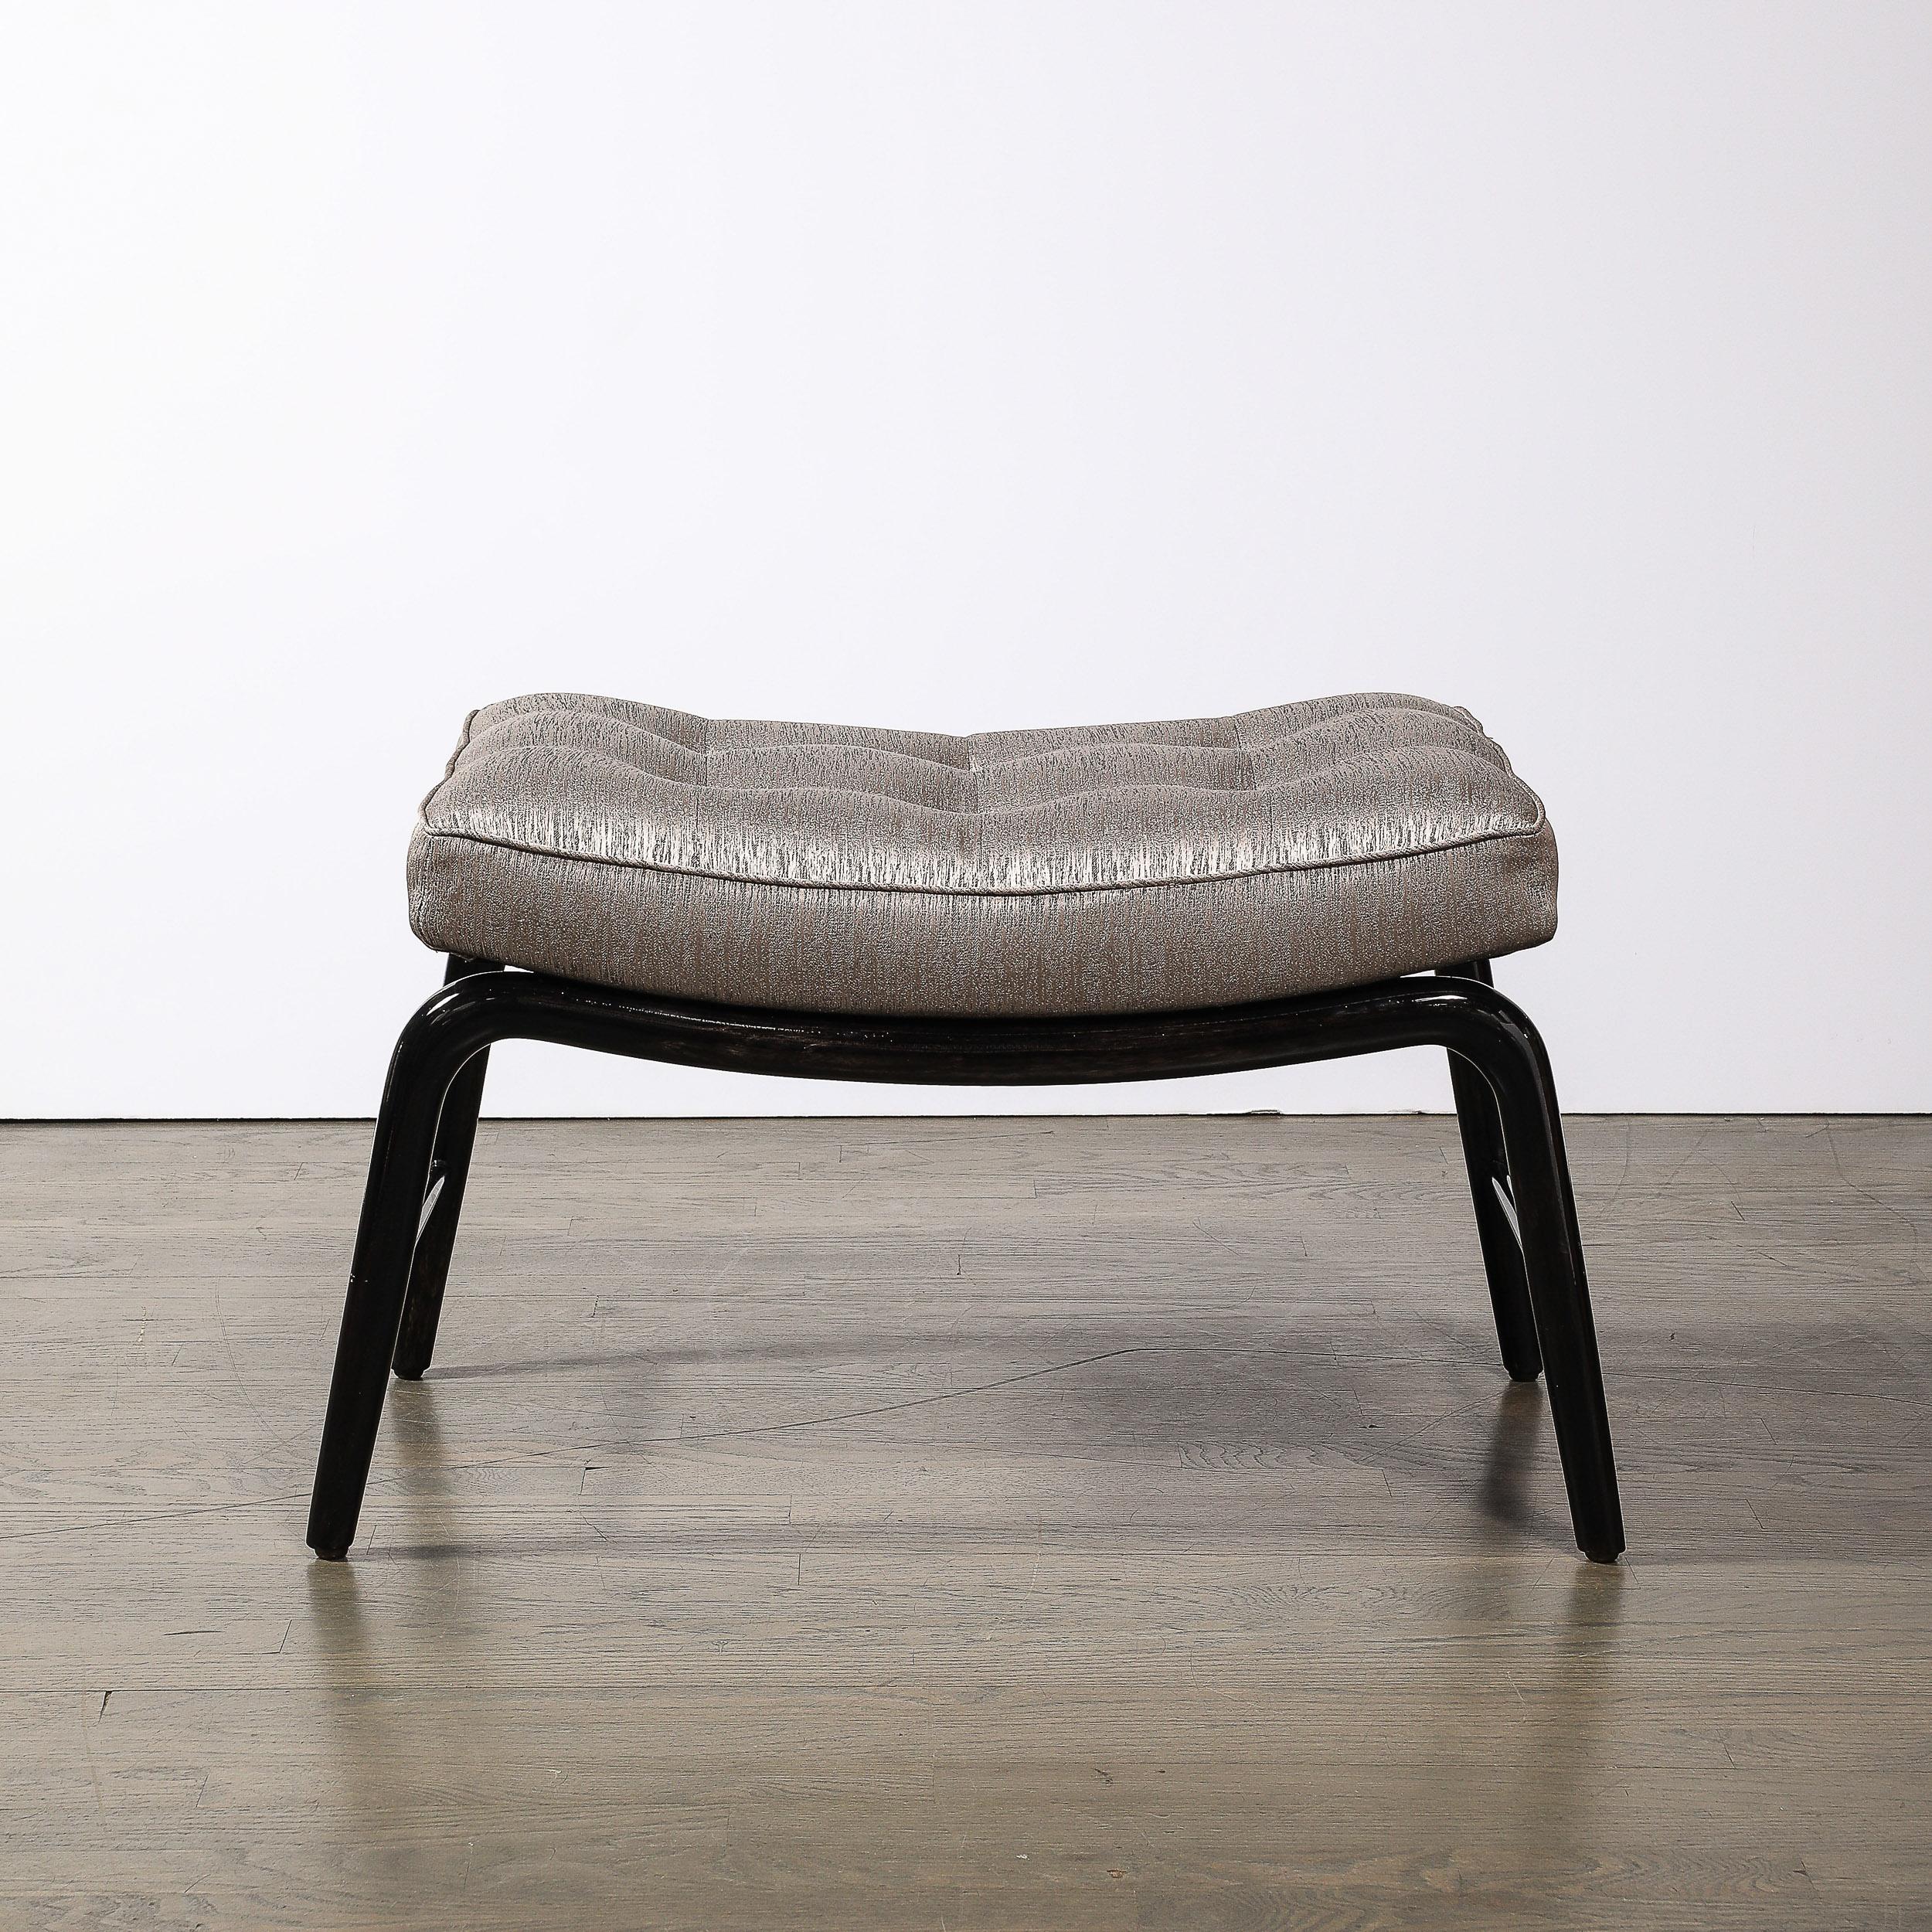 This sleek and well balanced Mid-Century Modernist Splayed Leg Sculptural bench  W/Button Detailing in Ebonized Walnut W/ Silver Linear Fabric originates from the United States, Circa 1950. Features a cylindrical framework in sculptural walnut with